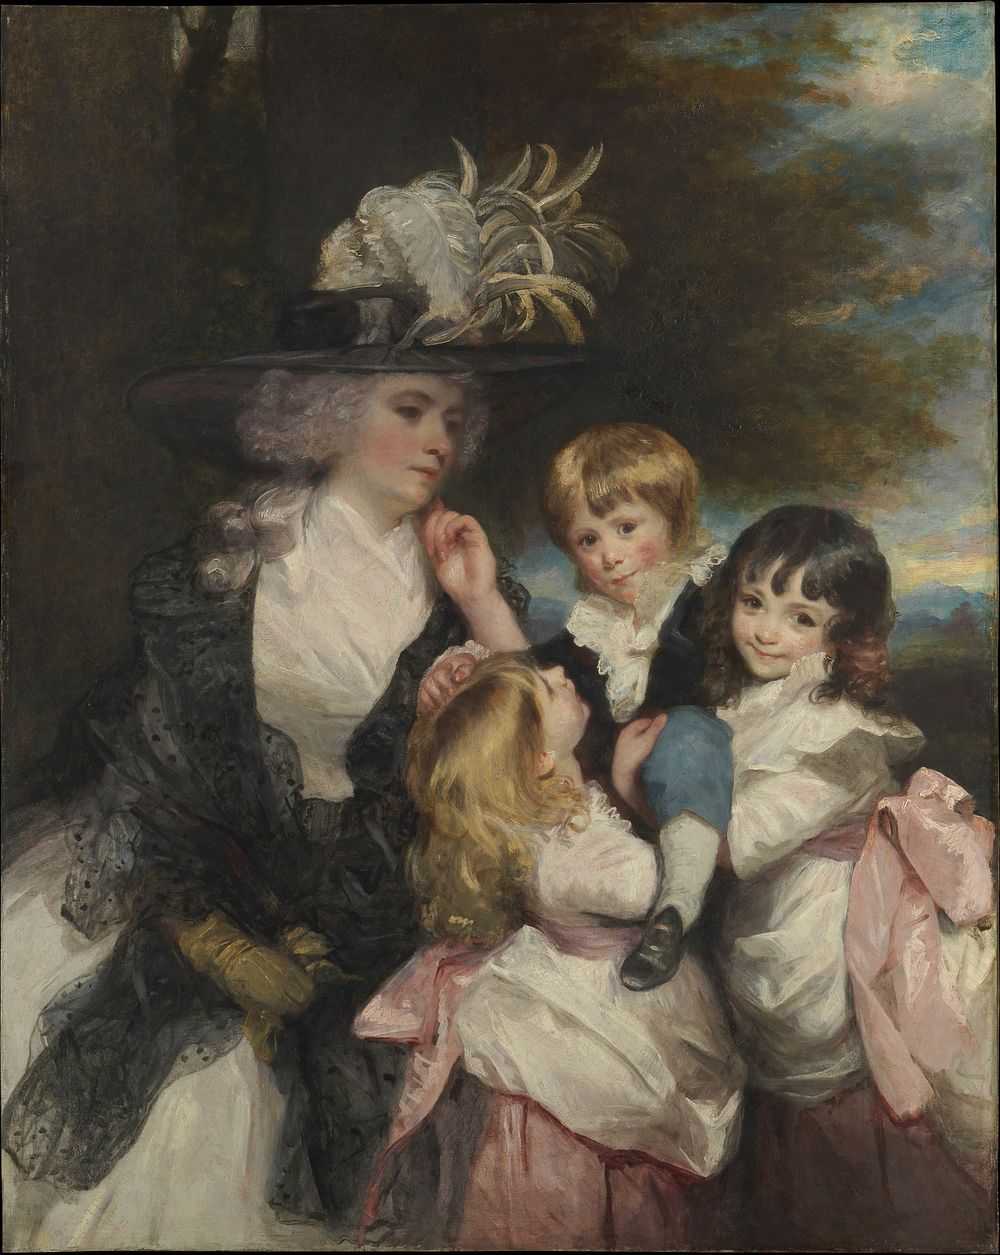 Lady Smith (Charlotte Delaval) and Her Children (George Henry, Louisa, and Charlotte) by Sir Joshua Reynolds